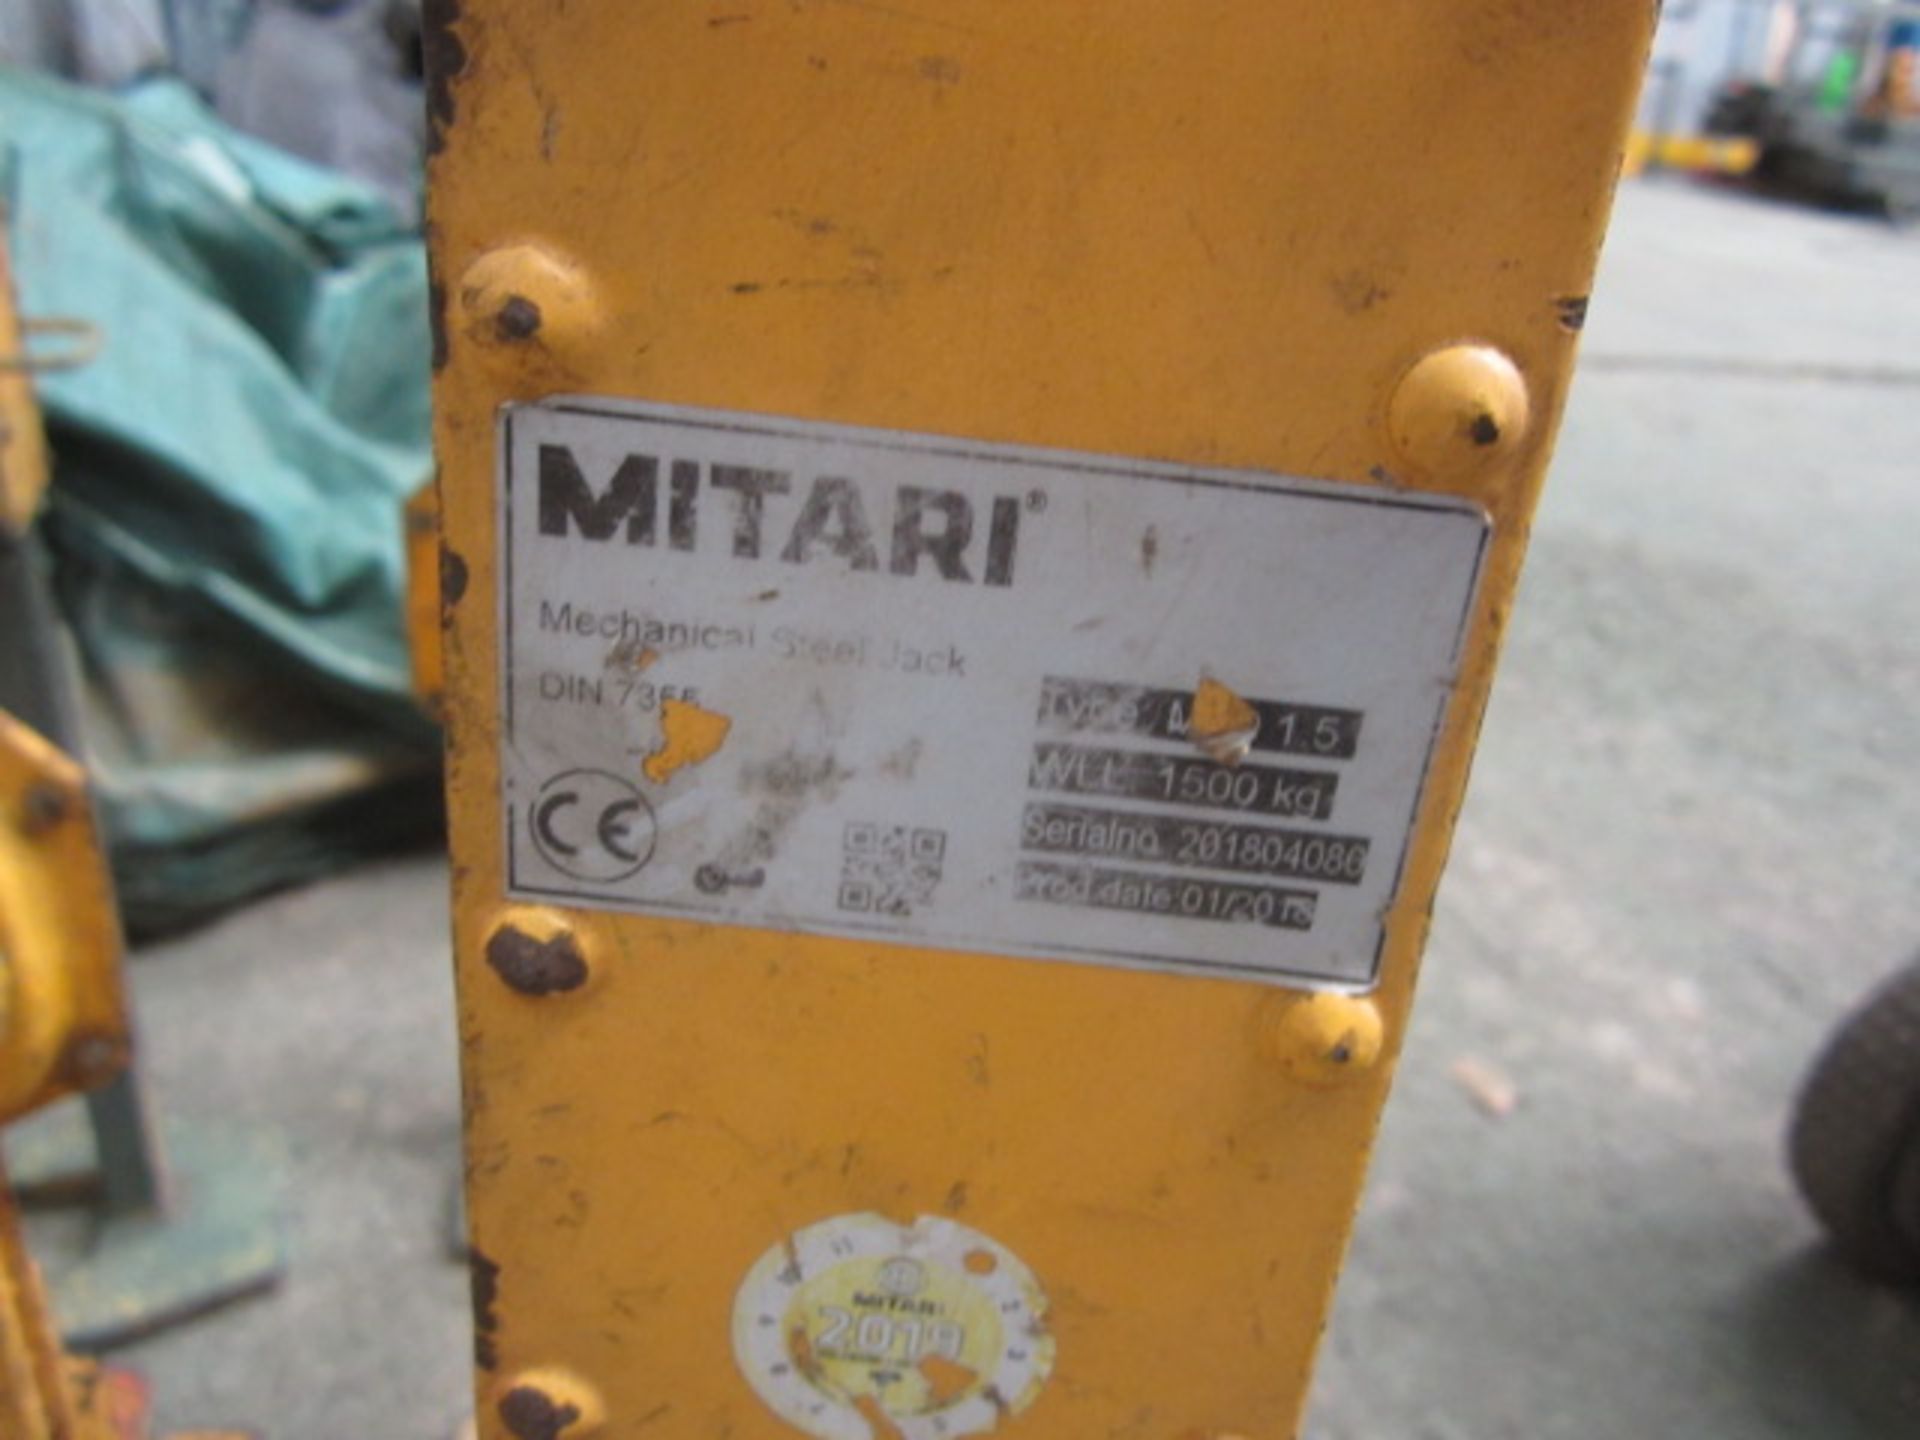 Six Mitari mechanical steel jacks SWL 1,500kg - 2 unknown working condition NB: This item has no - Image 3 of 4